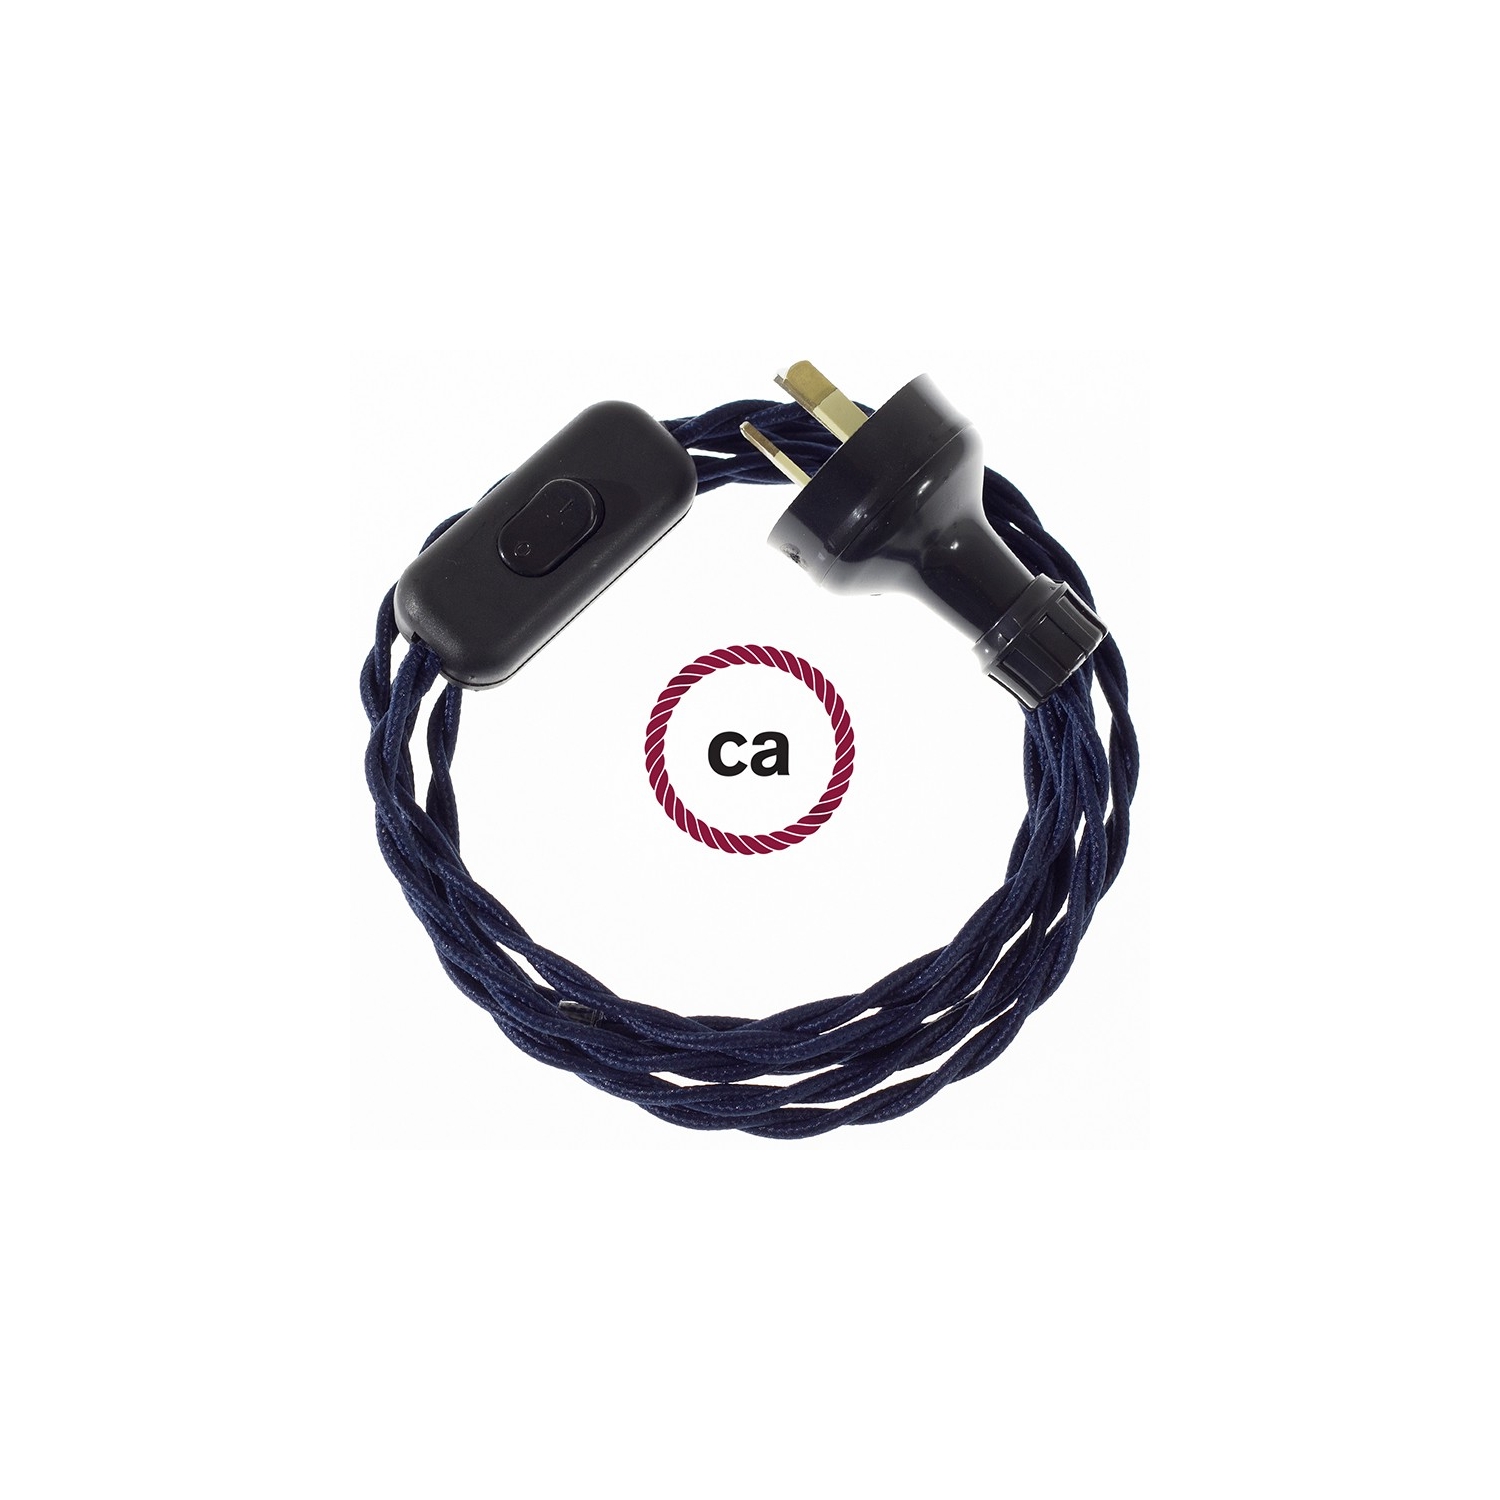 Wiring Dark Blue Rayon textile cable TM20 - 1.80 mt